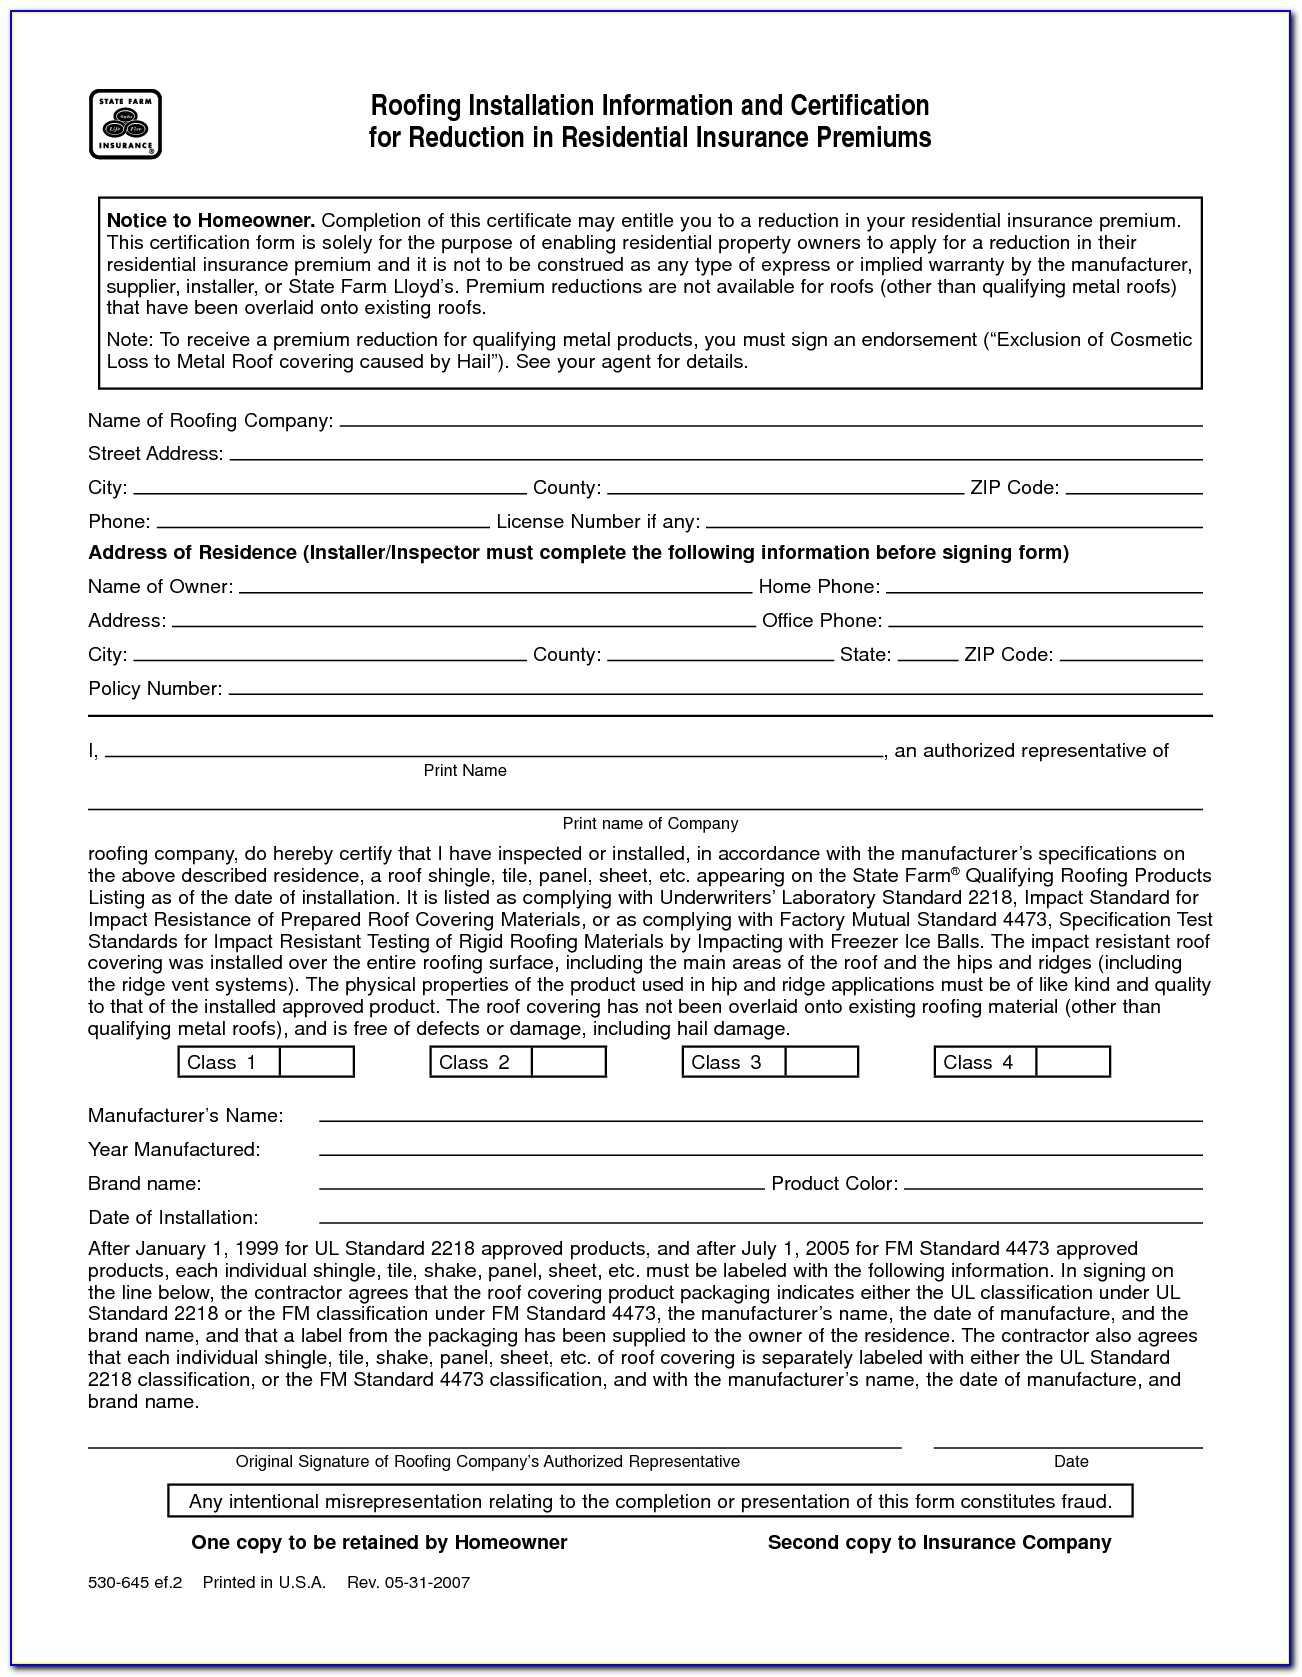 Citizens Insurance Roof Certification Form Form : Resume For Roof